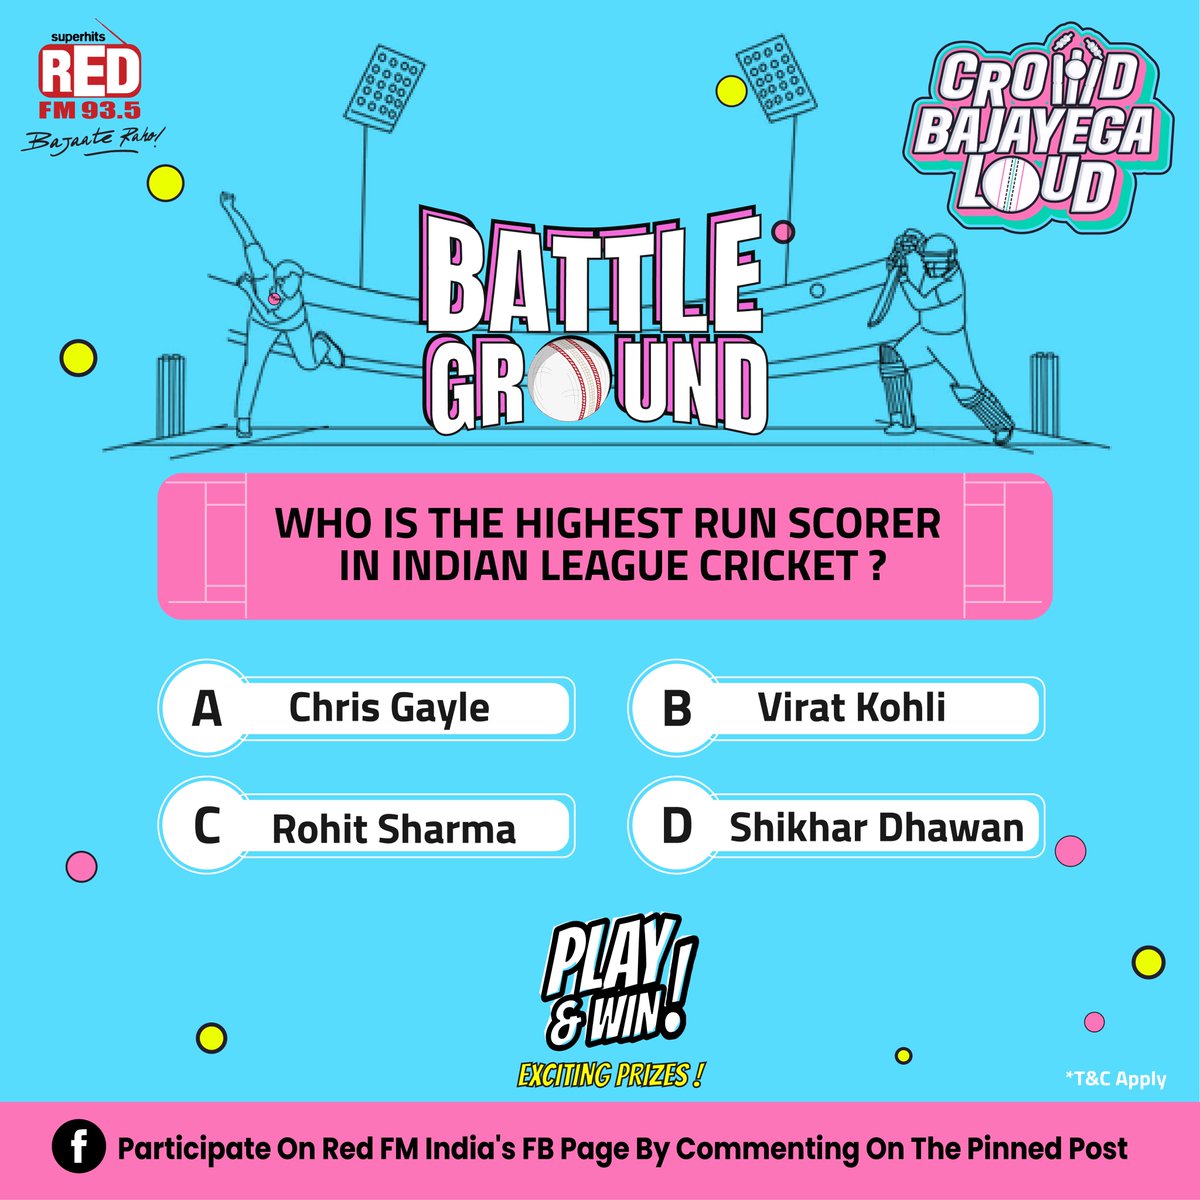 The Bat Is Not A Toy, It's A Weapon! Your Cricket Knowledge Is Not Nothing, It's A Possession! Leave Your Answers In The Comments Section of The Pinned Post On Red FM India's FB Page & Stand A Chance To Win Exciting Prizes! #contestalert #crowdbajayegaloud #t20season #ipl